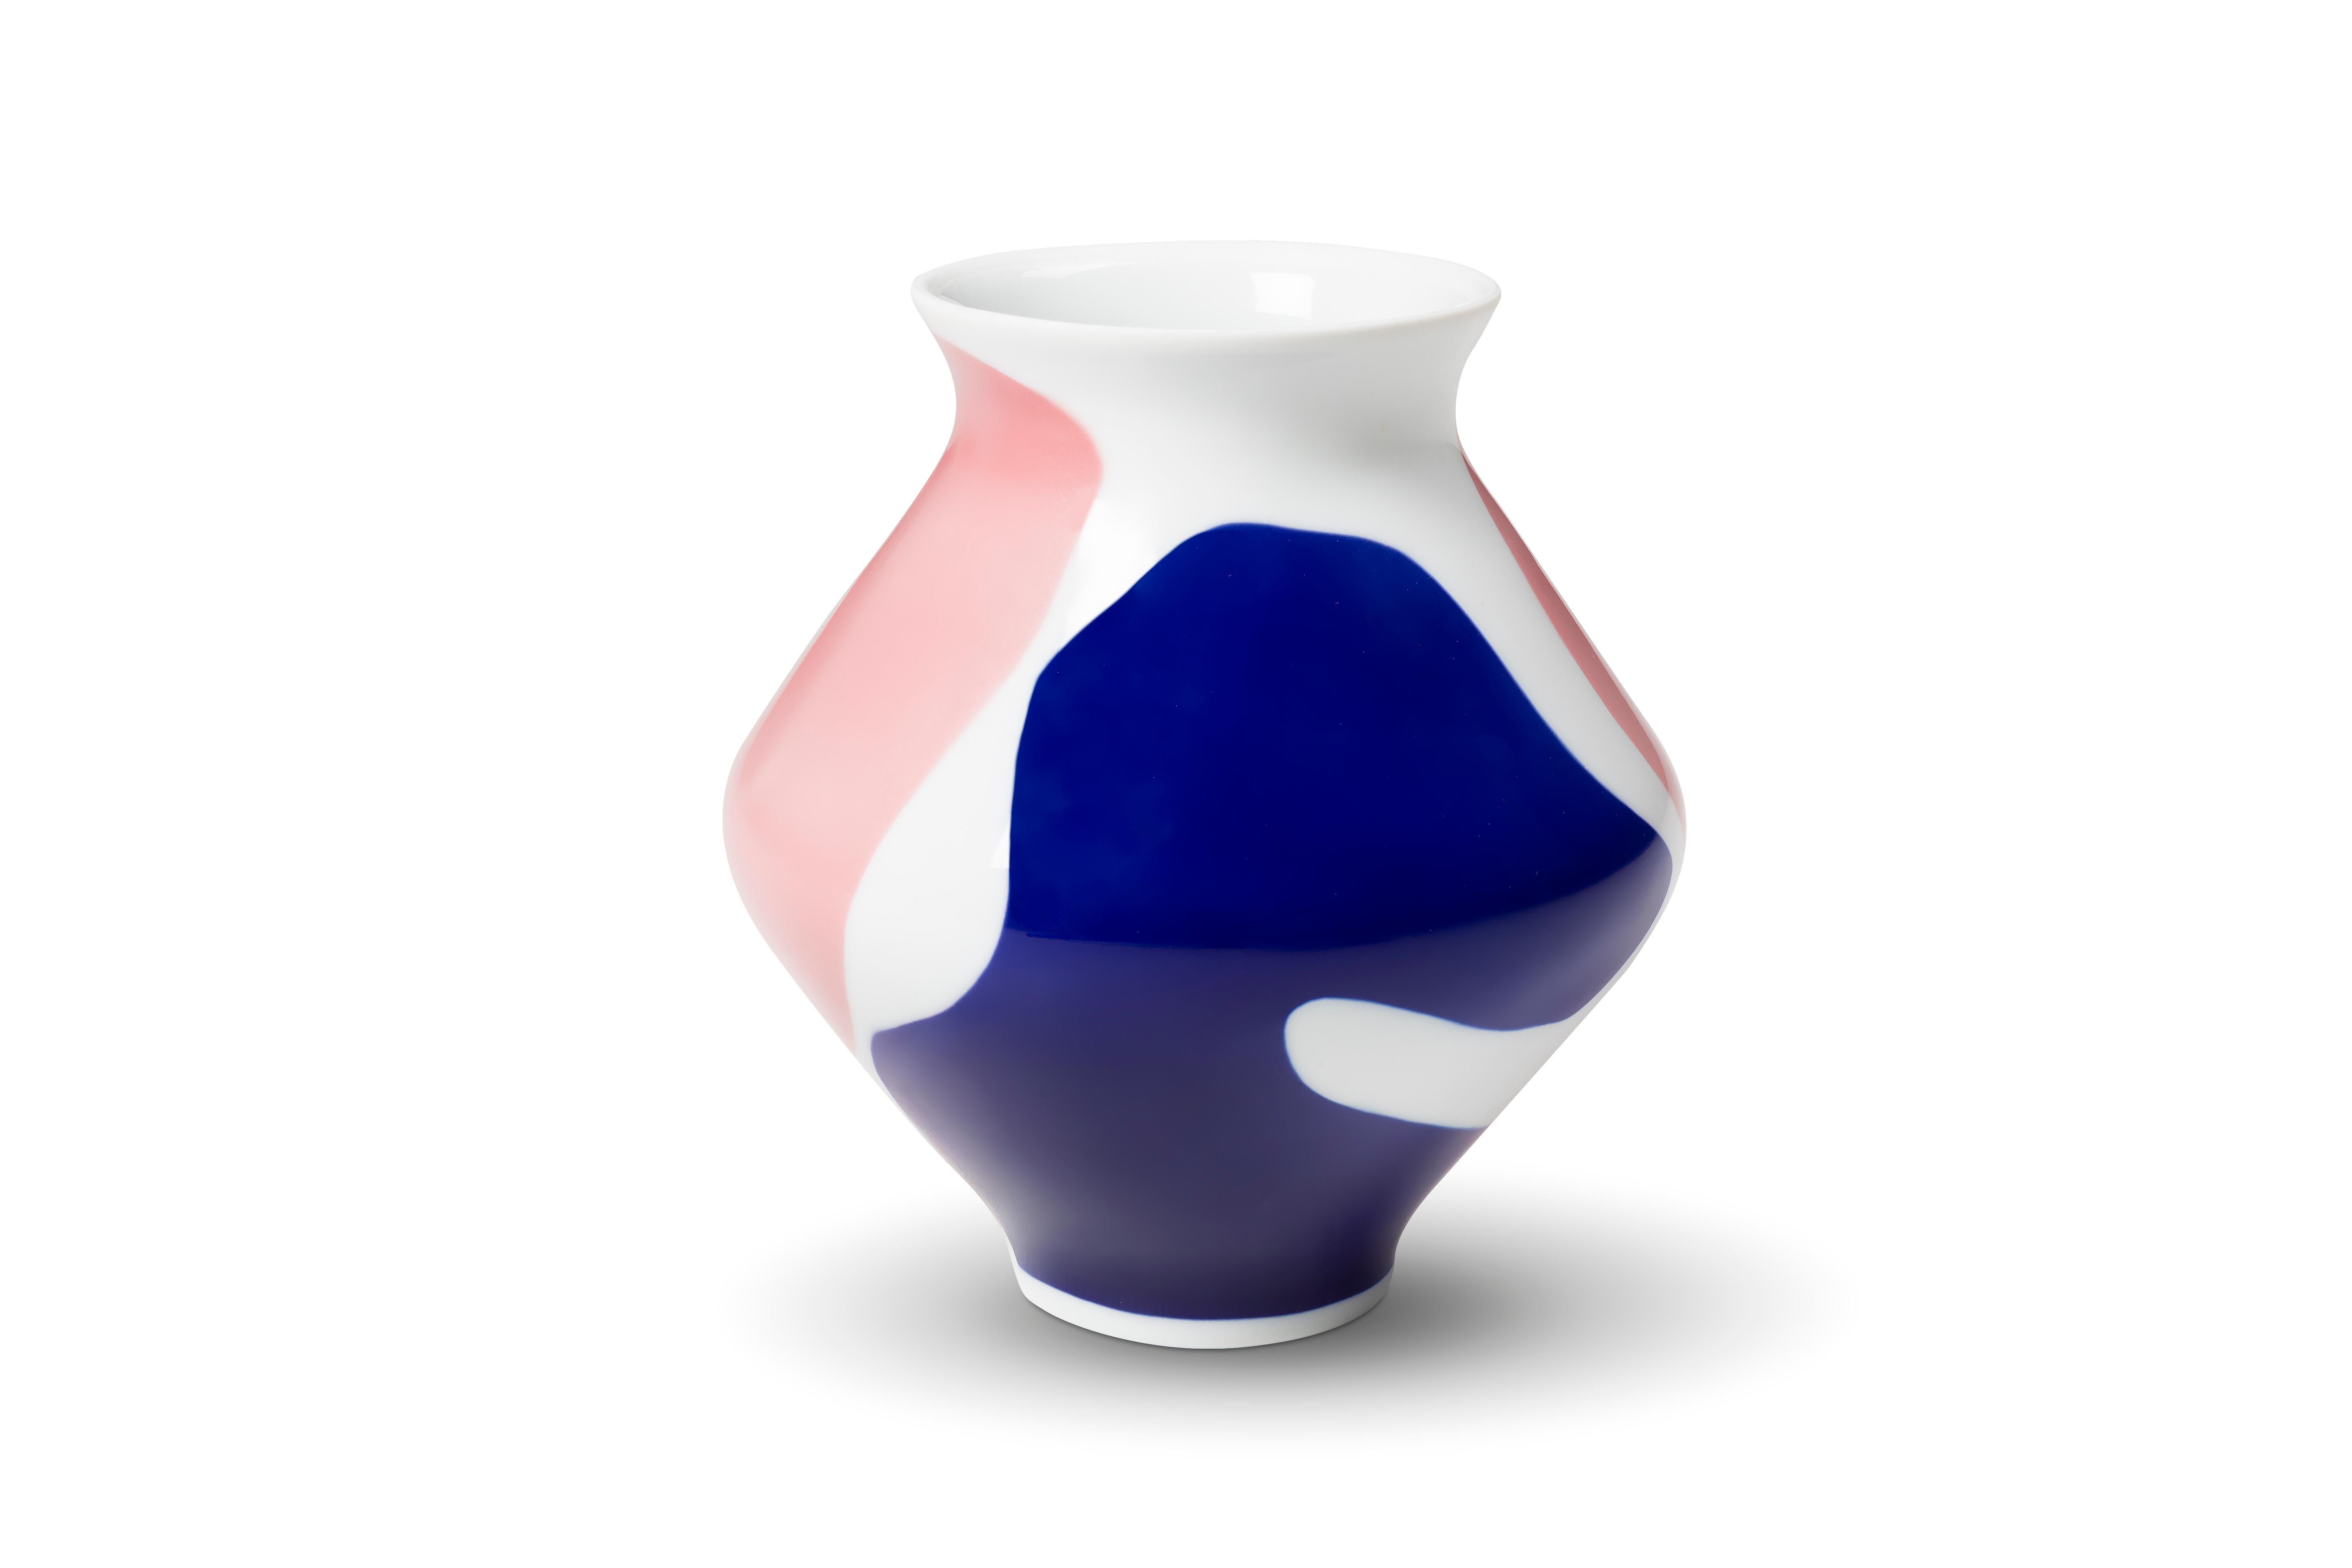 Continuing the first series of cobalt blue contrast vases on extra fine white porcelain, this new edition in blue and pink designed by VISO and handcrafted by the artisans at Sargadelos becomes the perfect compliment for a VISO home. Each of the